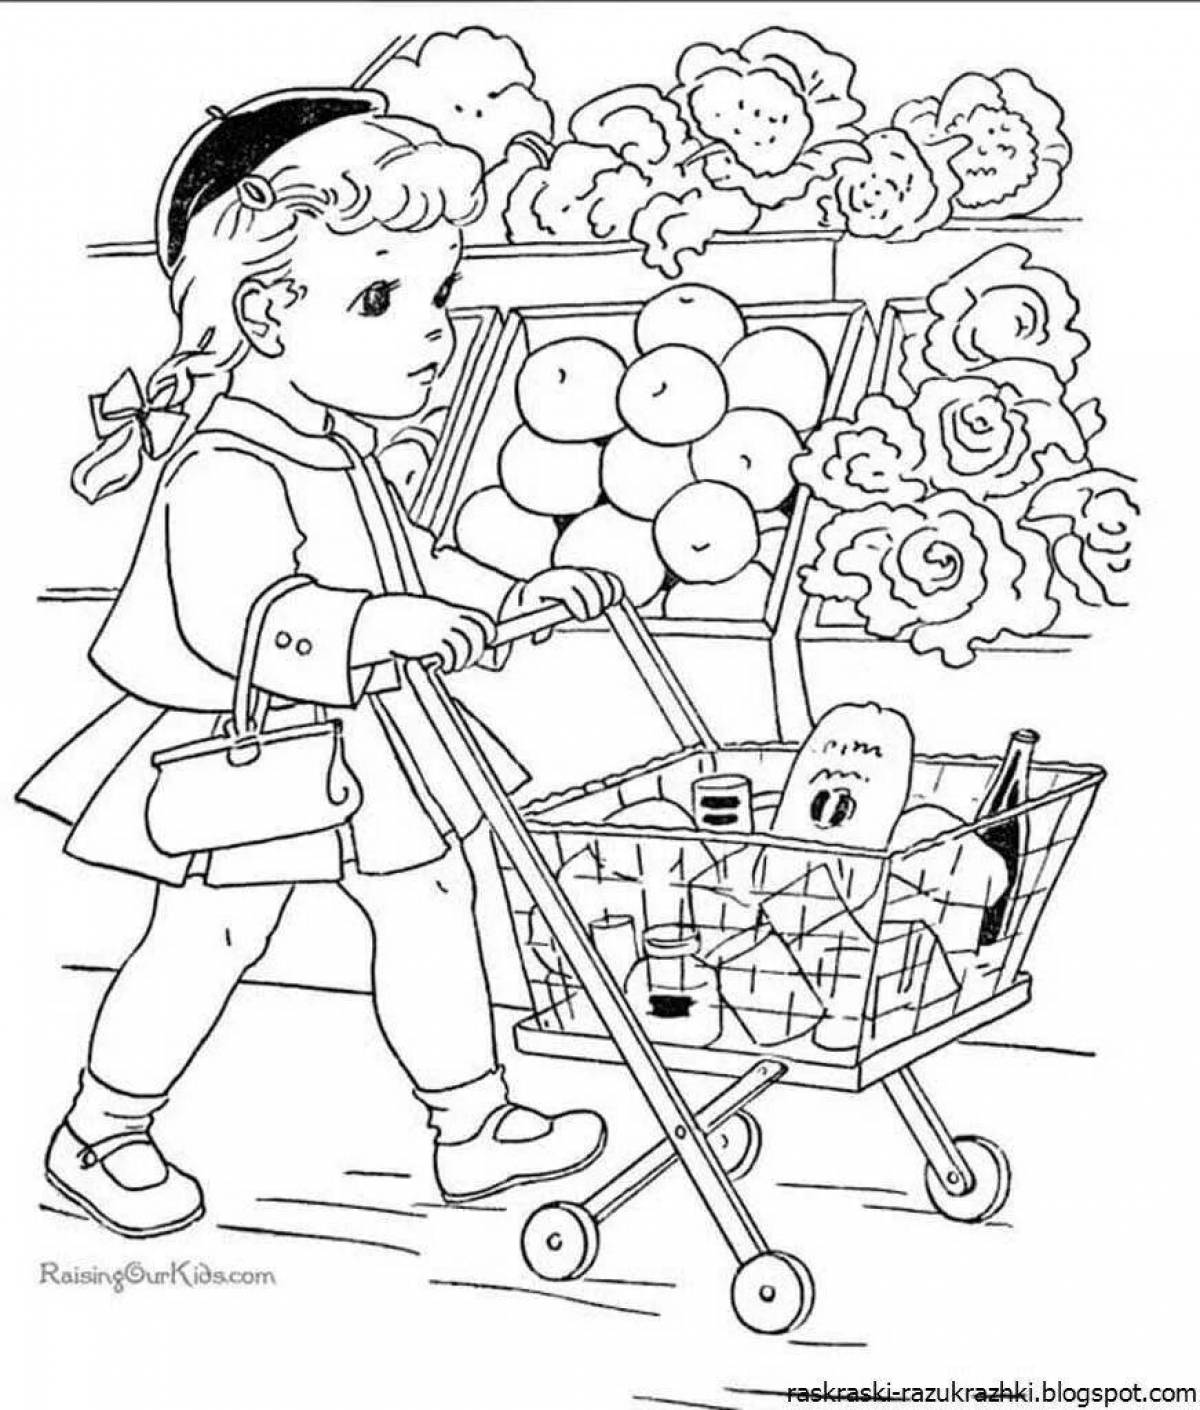 Shop for colorful coloring books for students